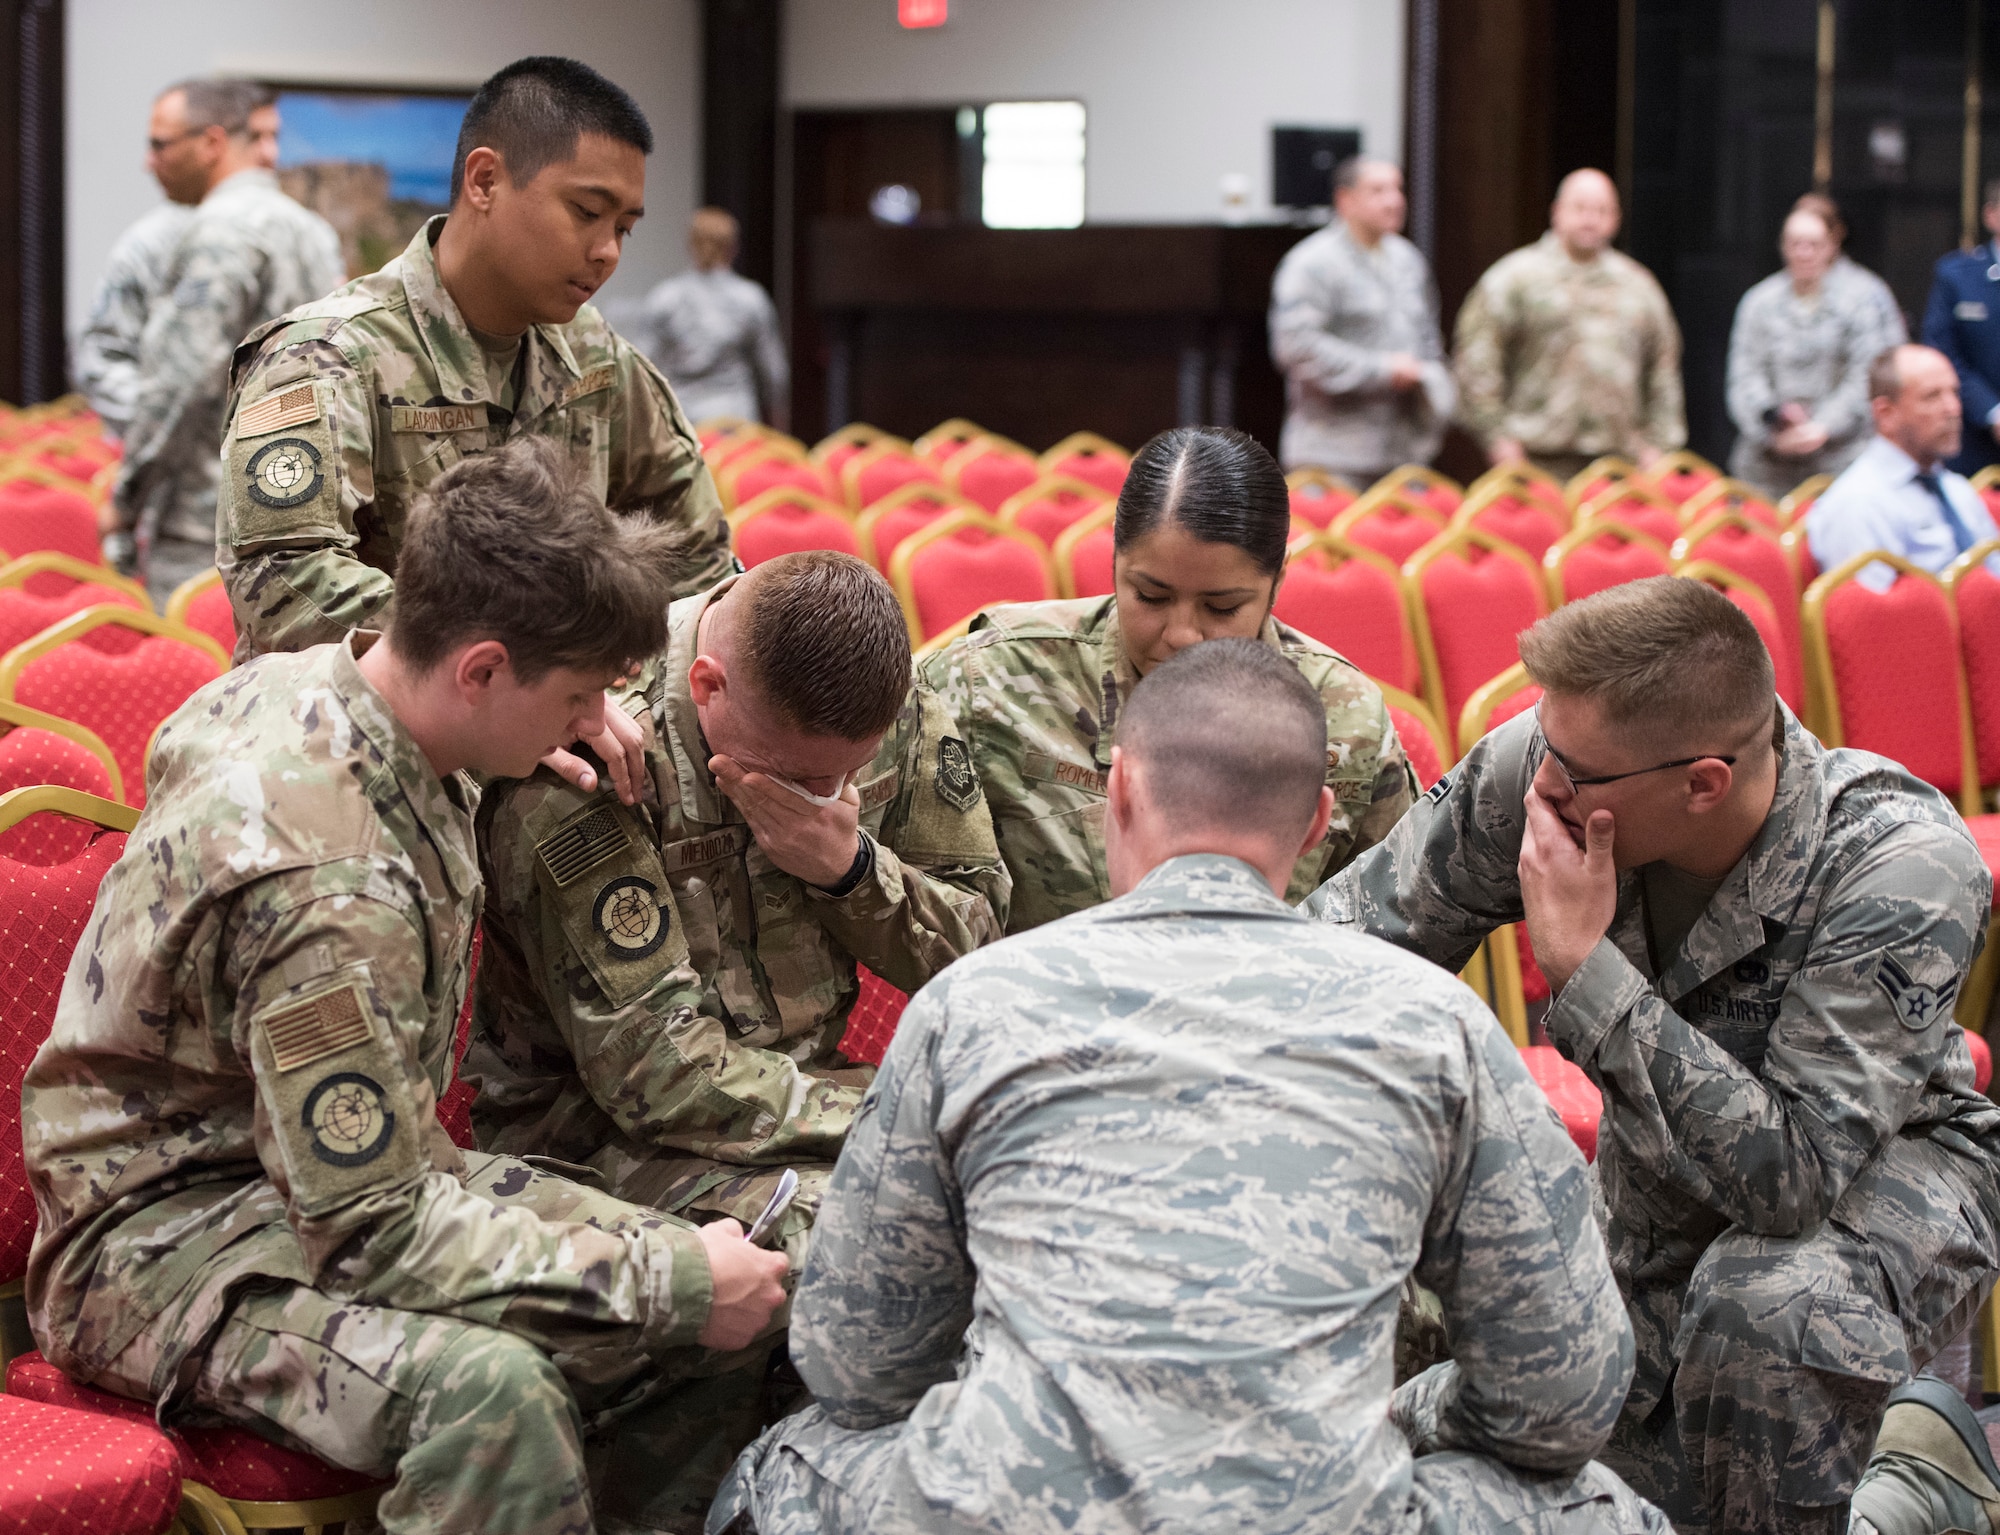 Airmen comfort each other during a memorial service for a colleague who committed suicide, Incirlik Air Base, Turkey, May 17, 2019. Since 2019, the Air Force has accelerated efforts to combat the suicide crisis among its uniformed and civilian personnel. (U.S. Air Force photo by Staff Sgt. Joshua Magbanua)